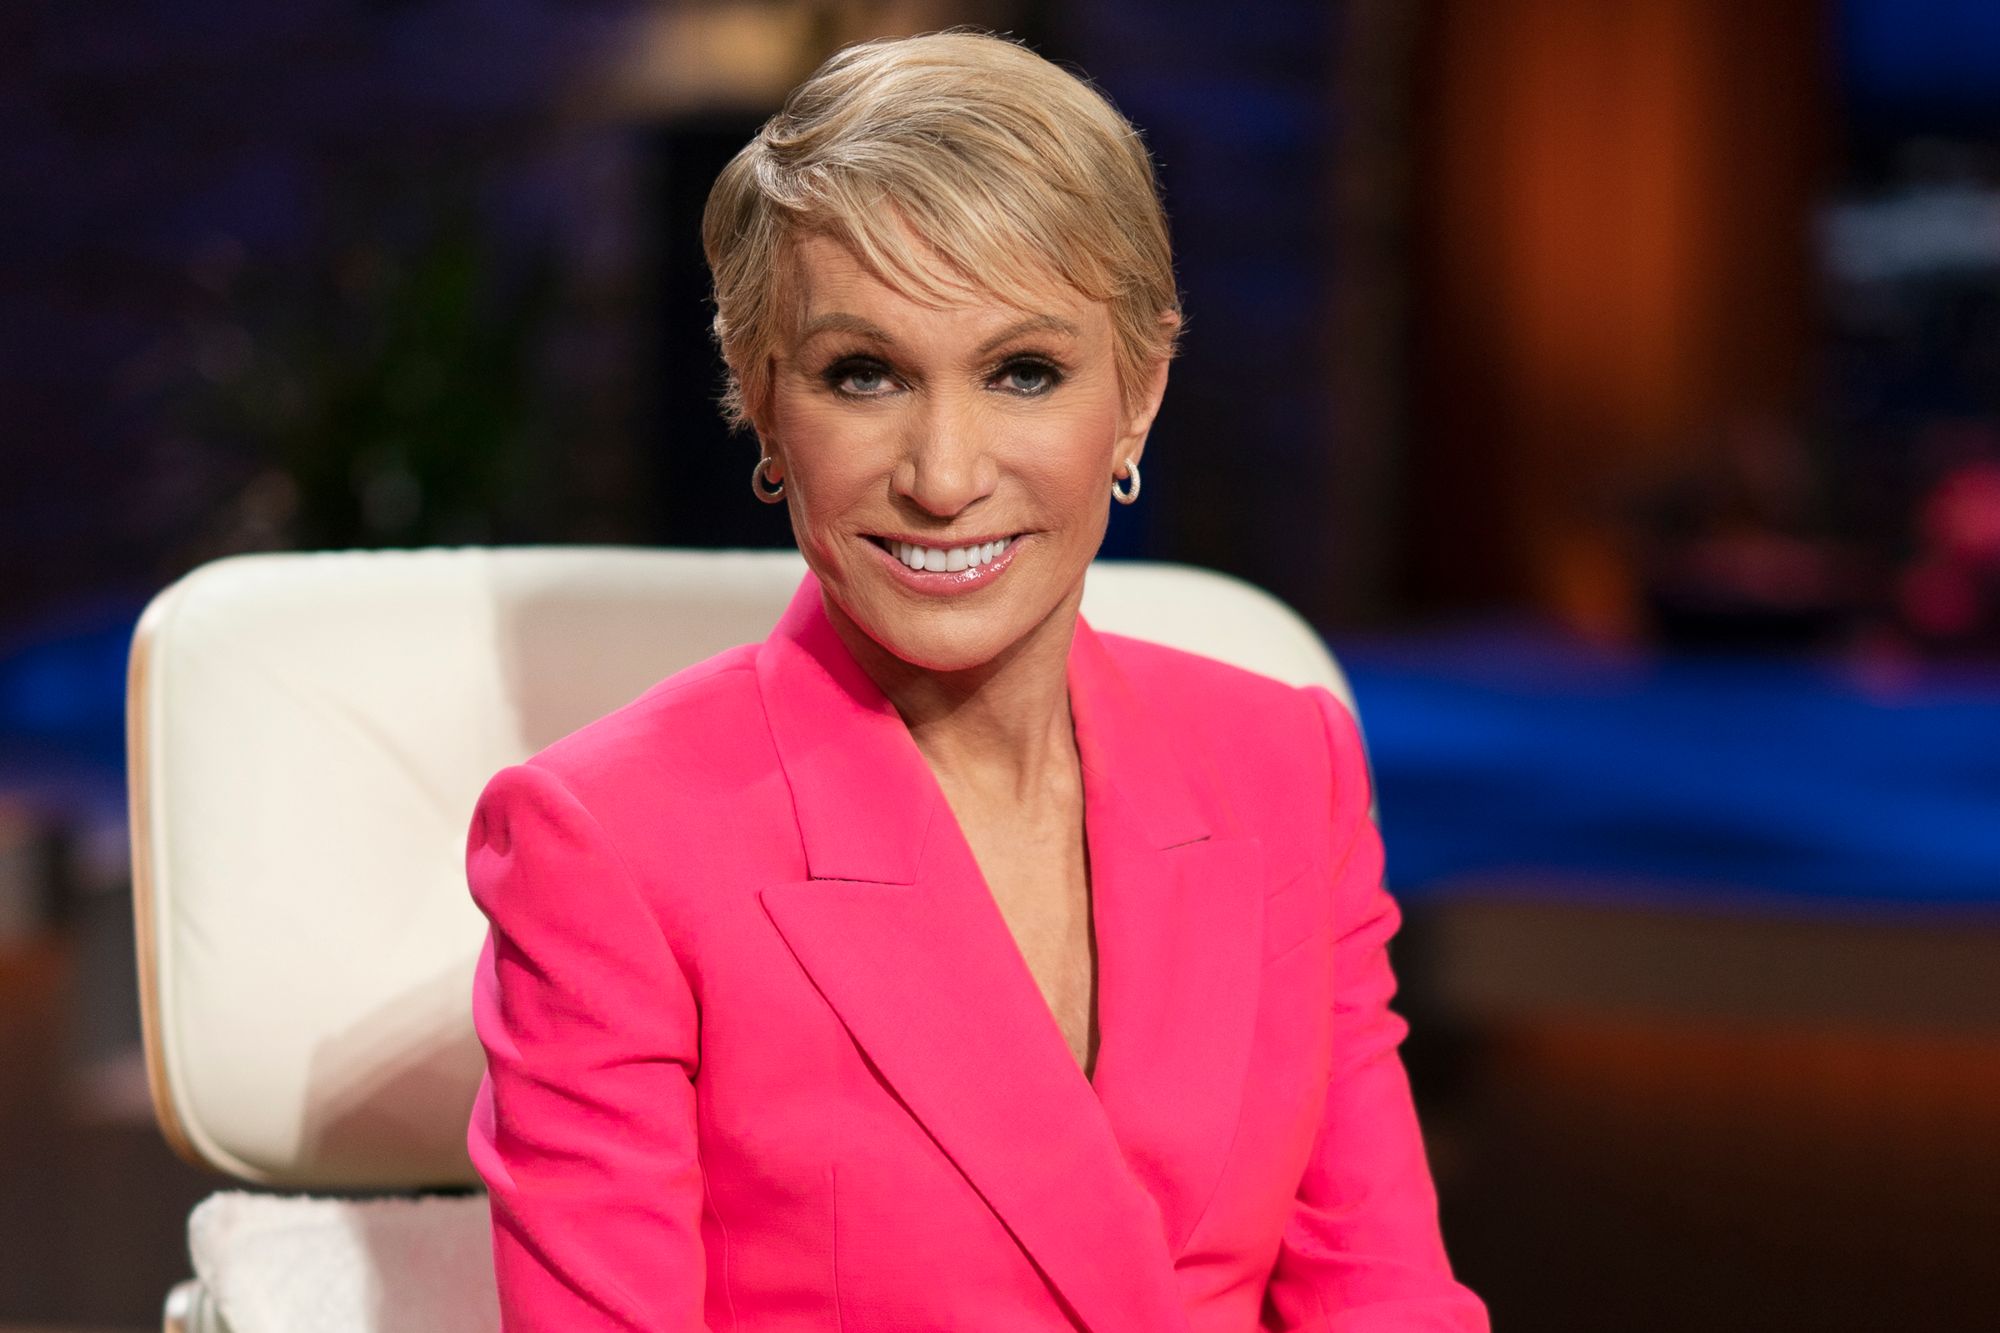 'Shark Tank' Barbara Corcoran, one of the sharks, smiling in a pink suit, while sitting in a white chair.